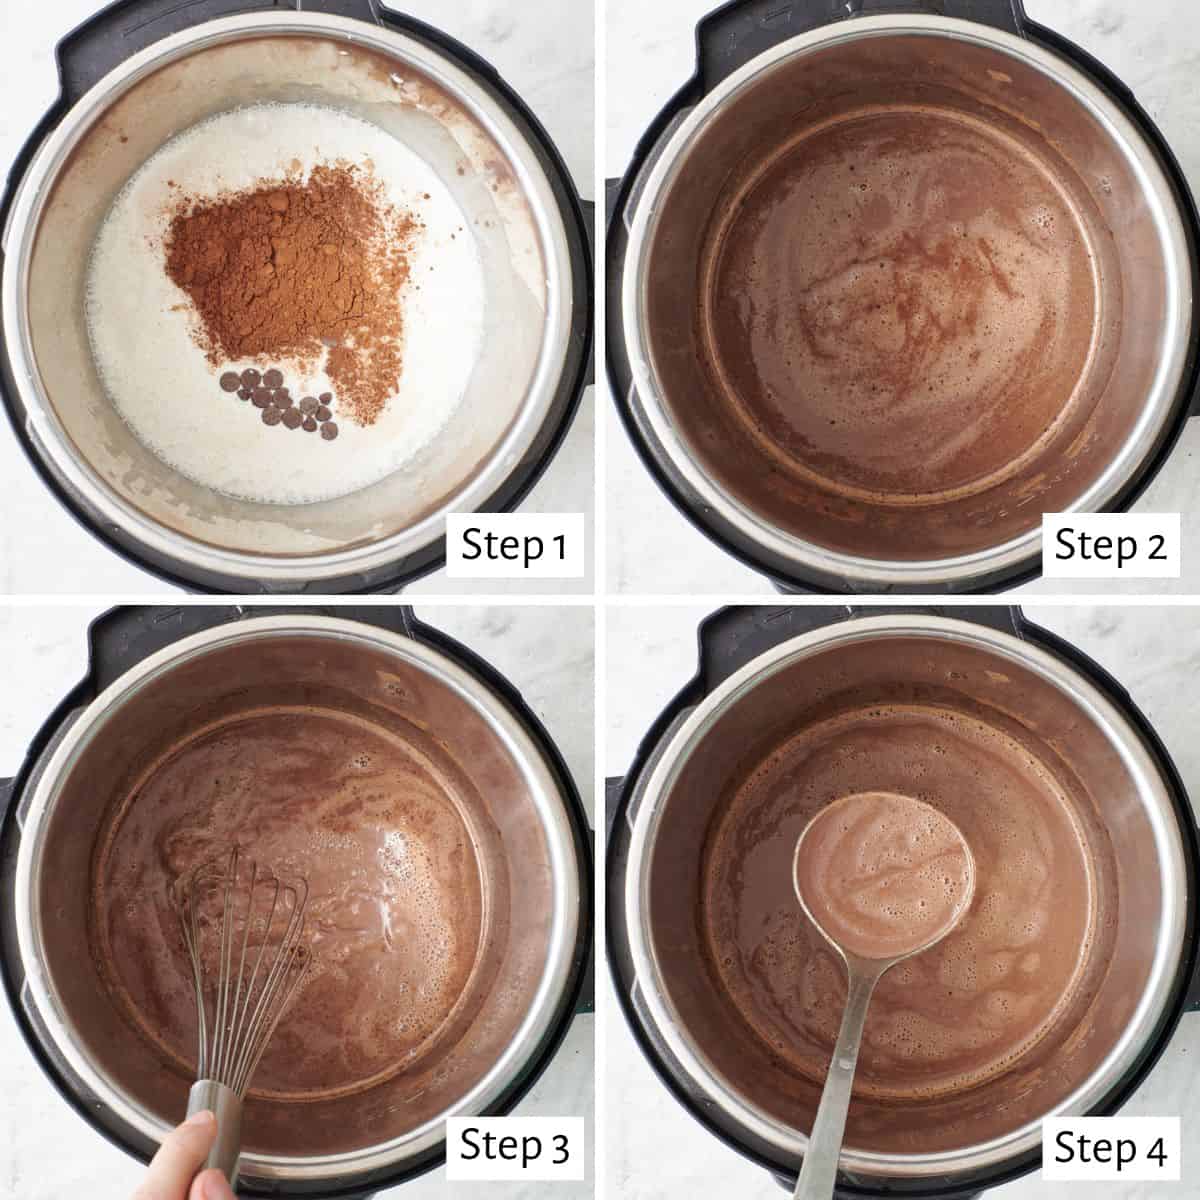 4 image collage making recipe in an Instant Pot: 1- ingredients added before mixing, 2- after mixed, 3- after cooking with a whisk stirring together, 4- ladle lifting up a serving.